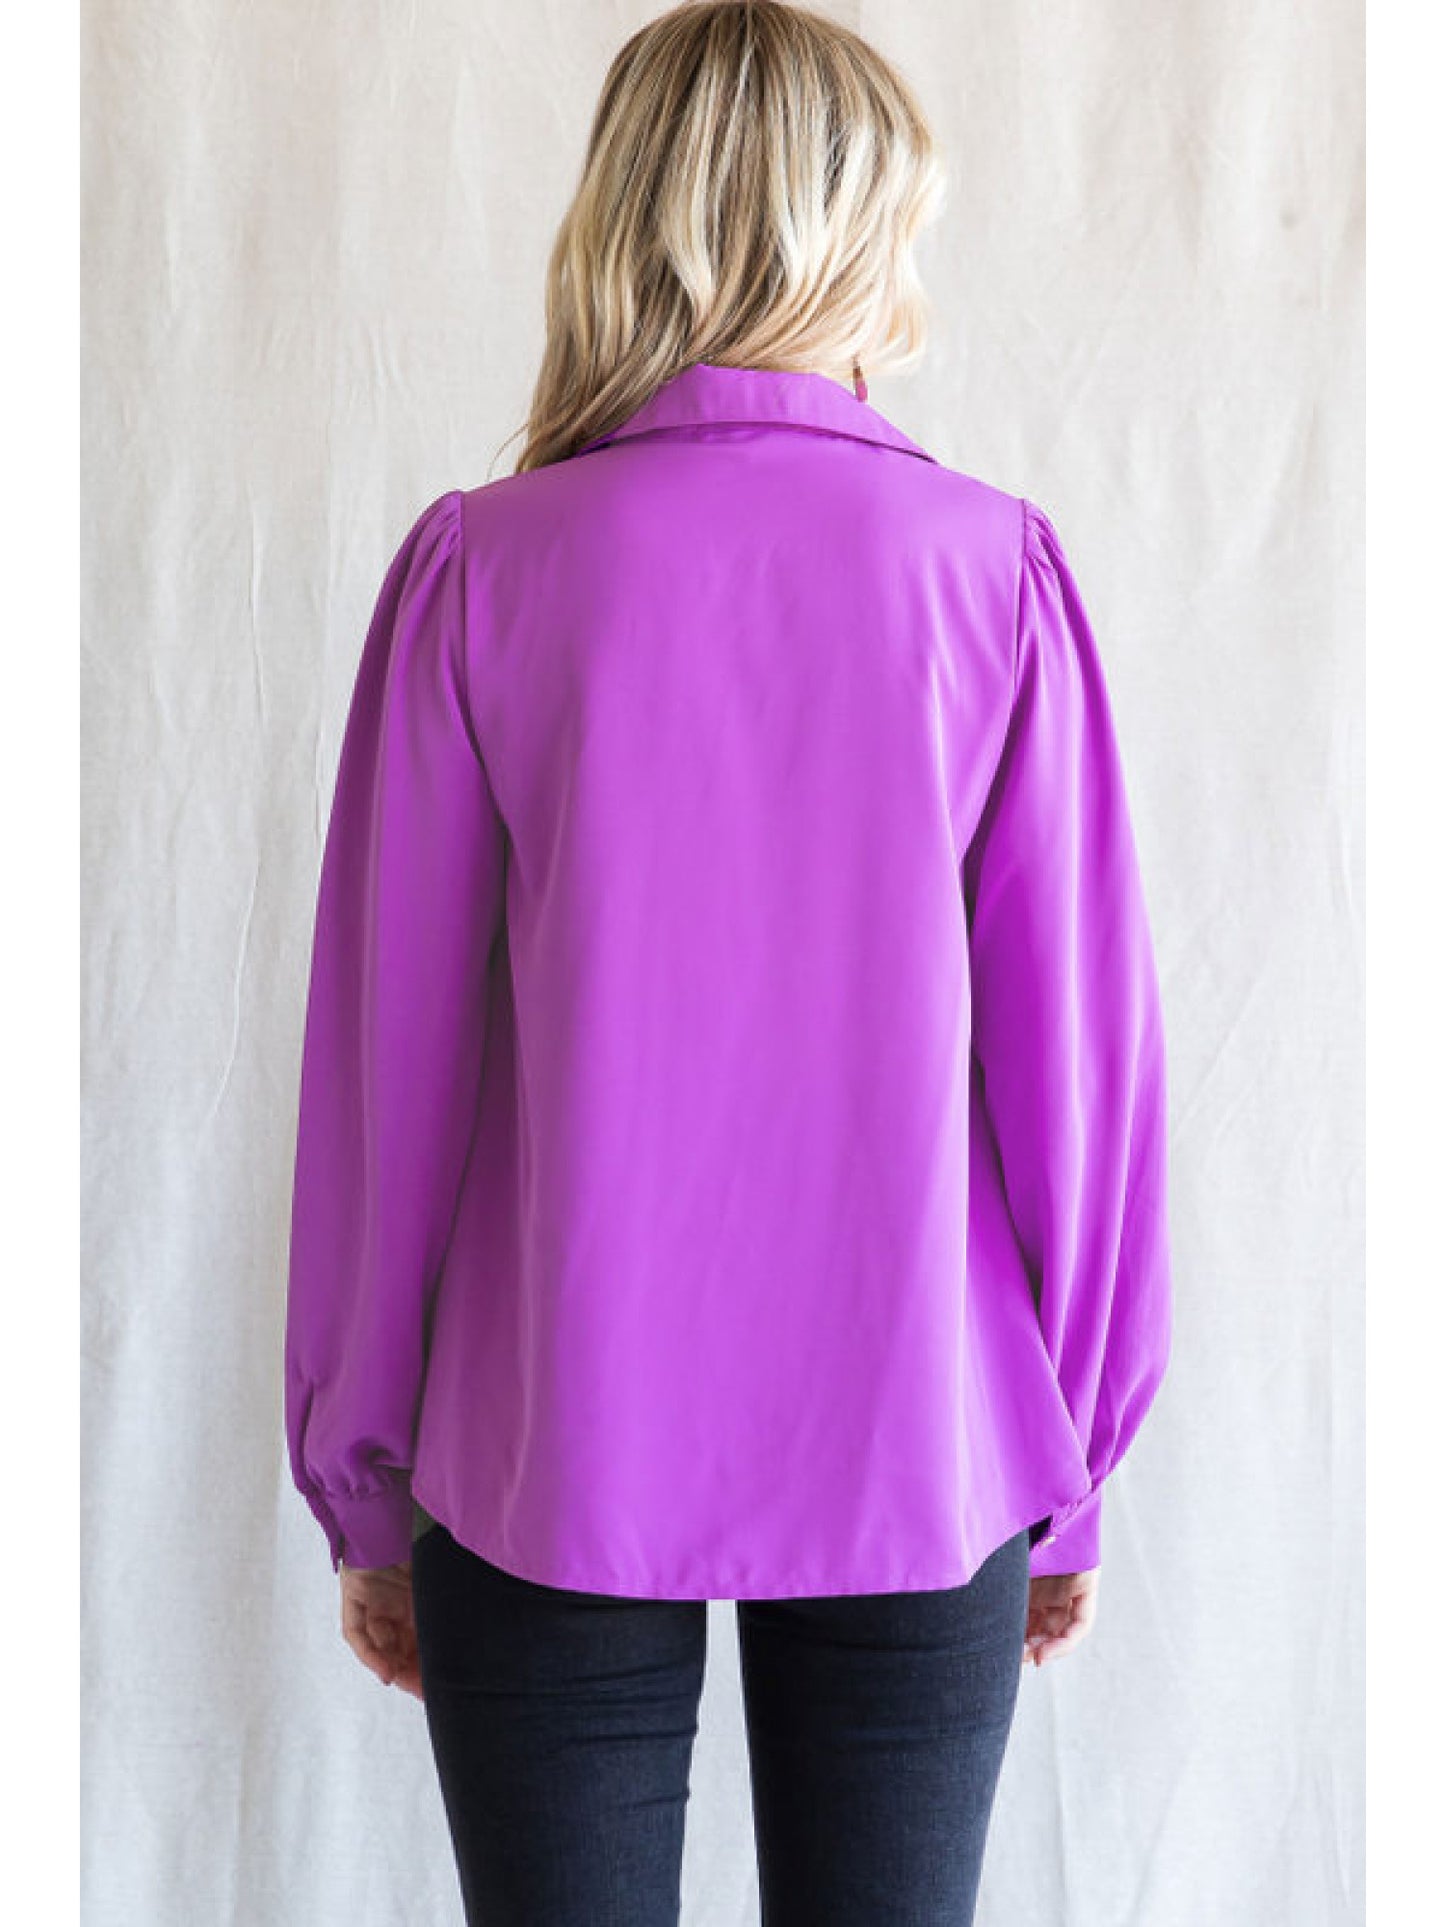 The Alivia Orchid top